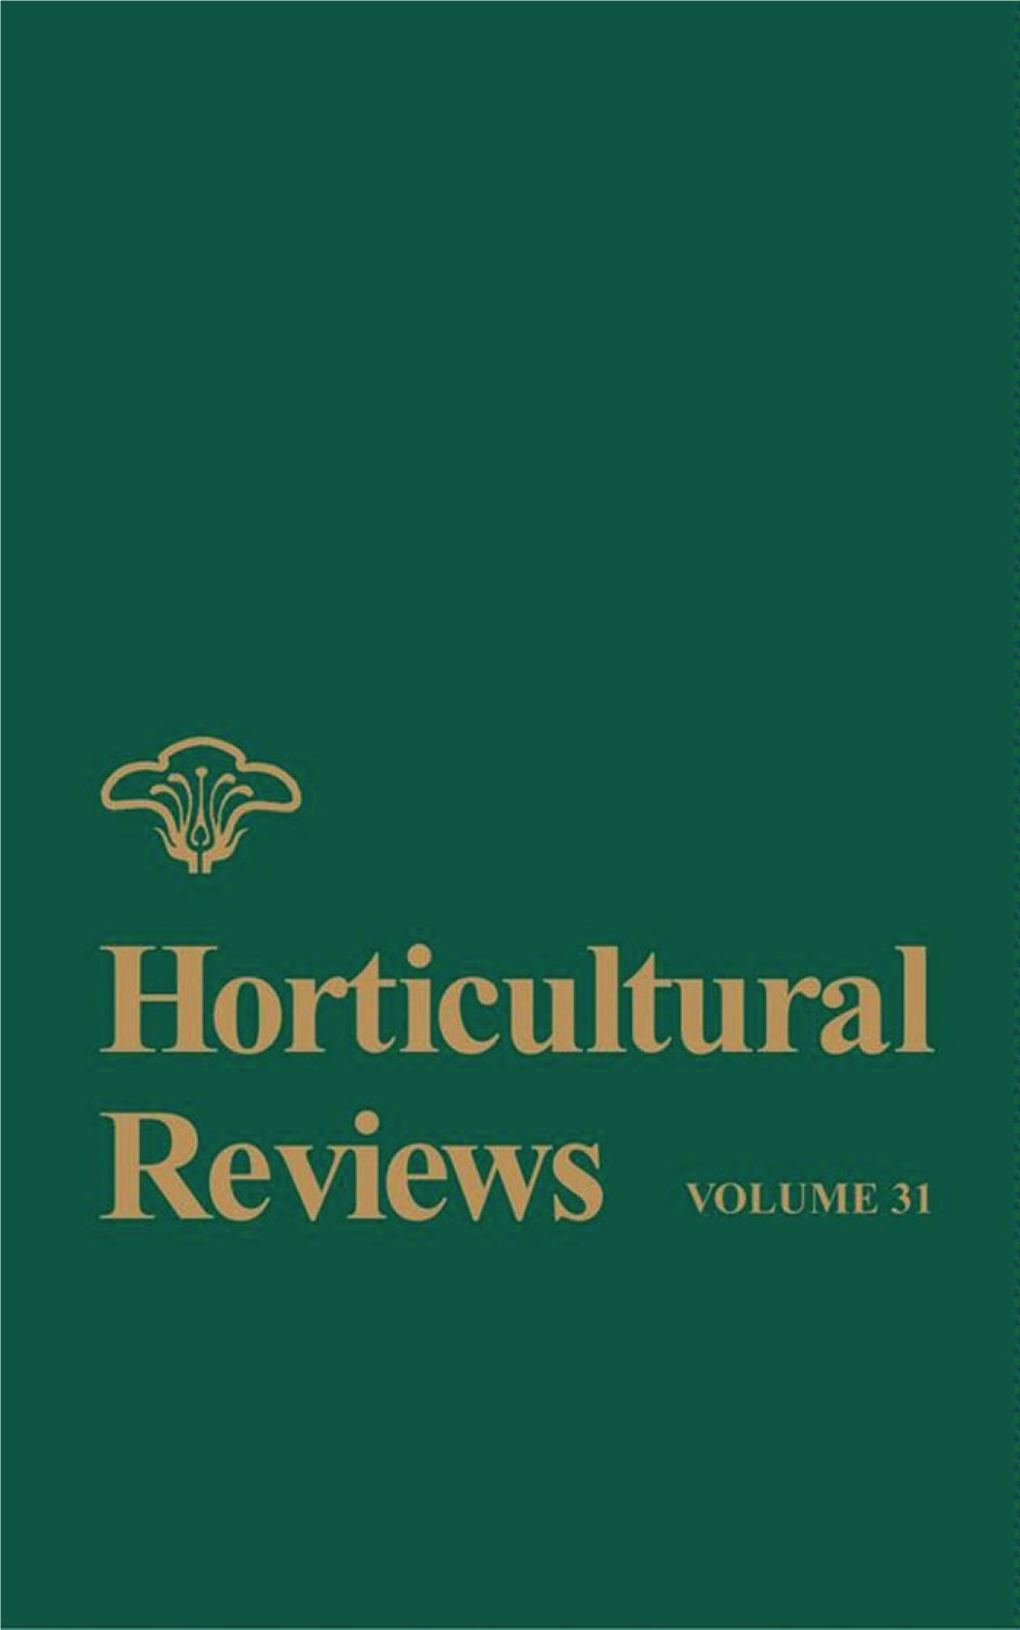 Horticultural Reviews (Volume